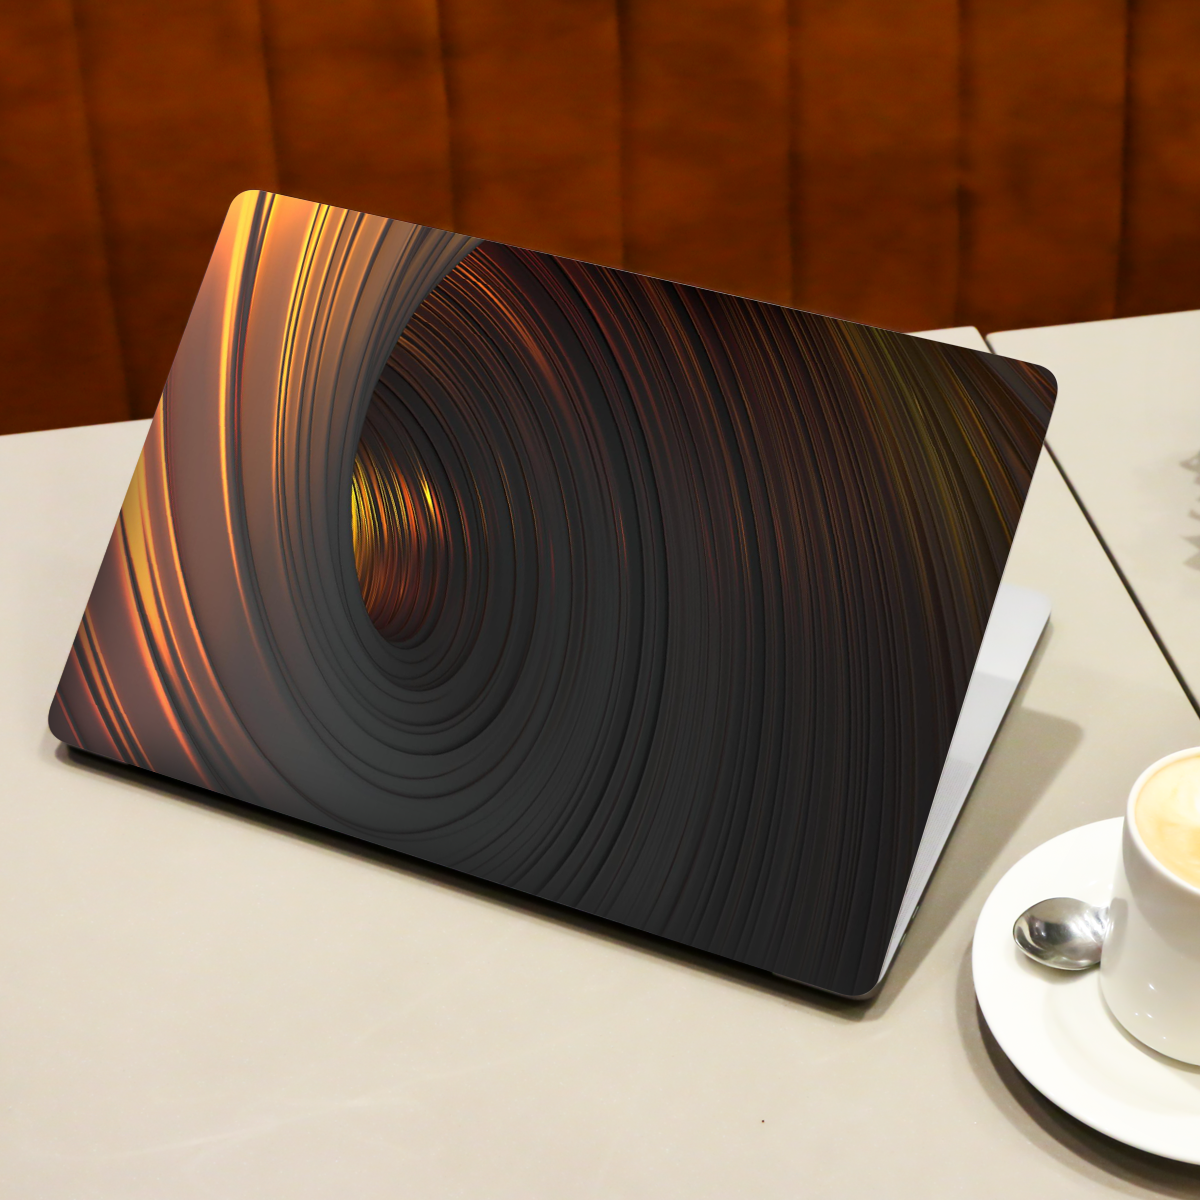 Twisted Design Abstract Laptop Skin